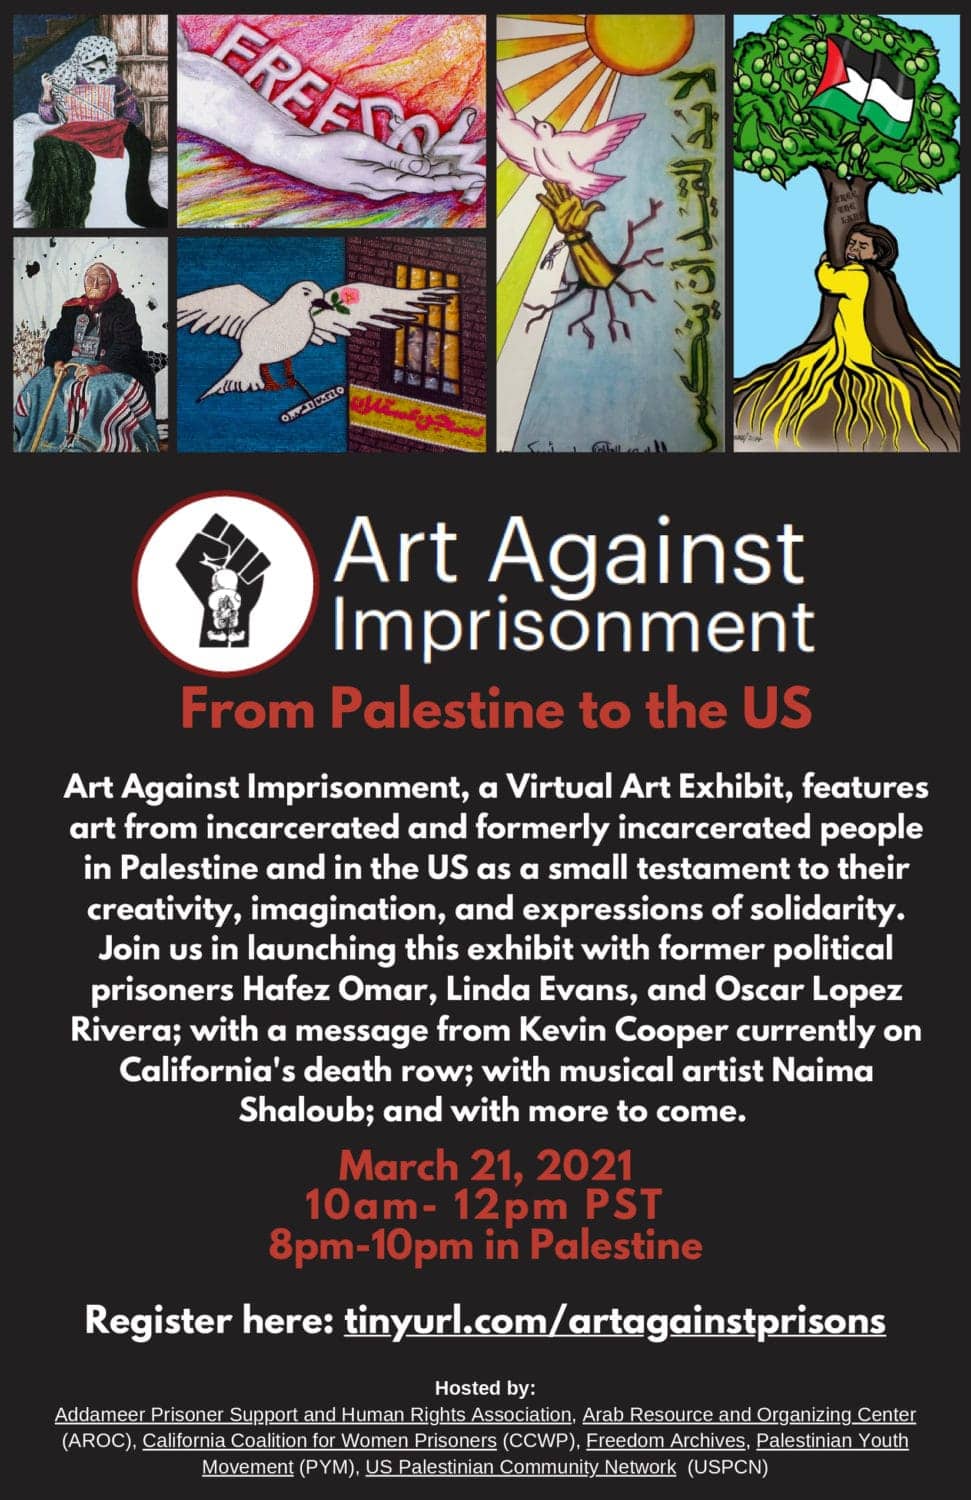 Palestine-Art-Against-Imprisonment-virtual-exhibit-032121, Statement for our Palestinian sisters and brothers!, Behind Enemy Lines 